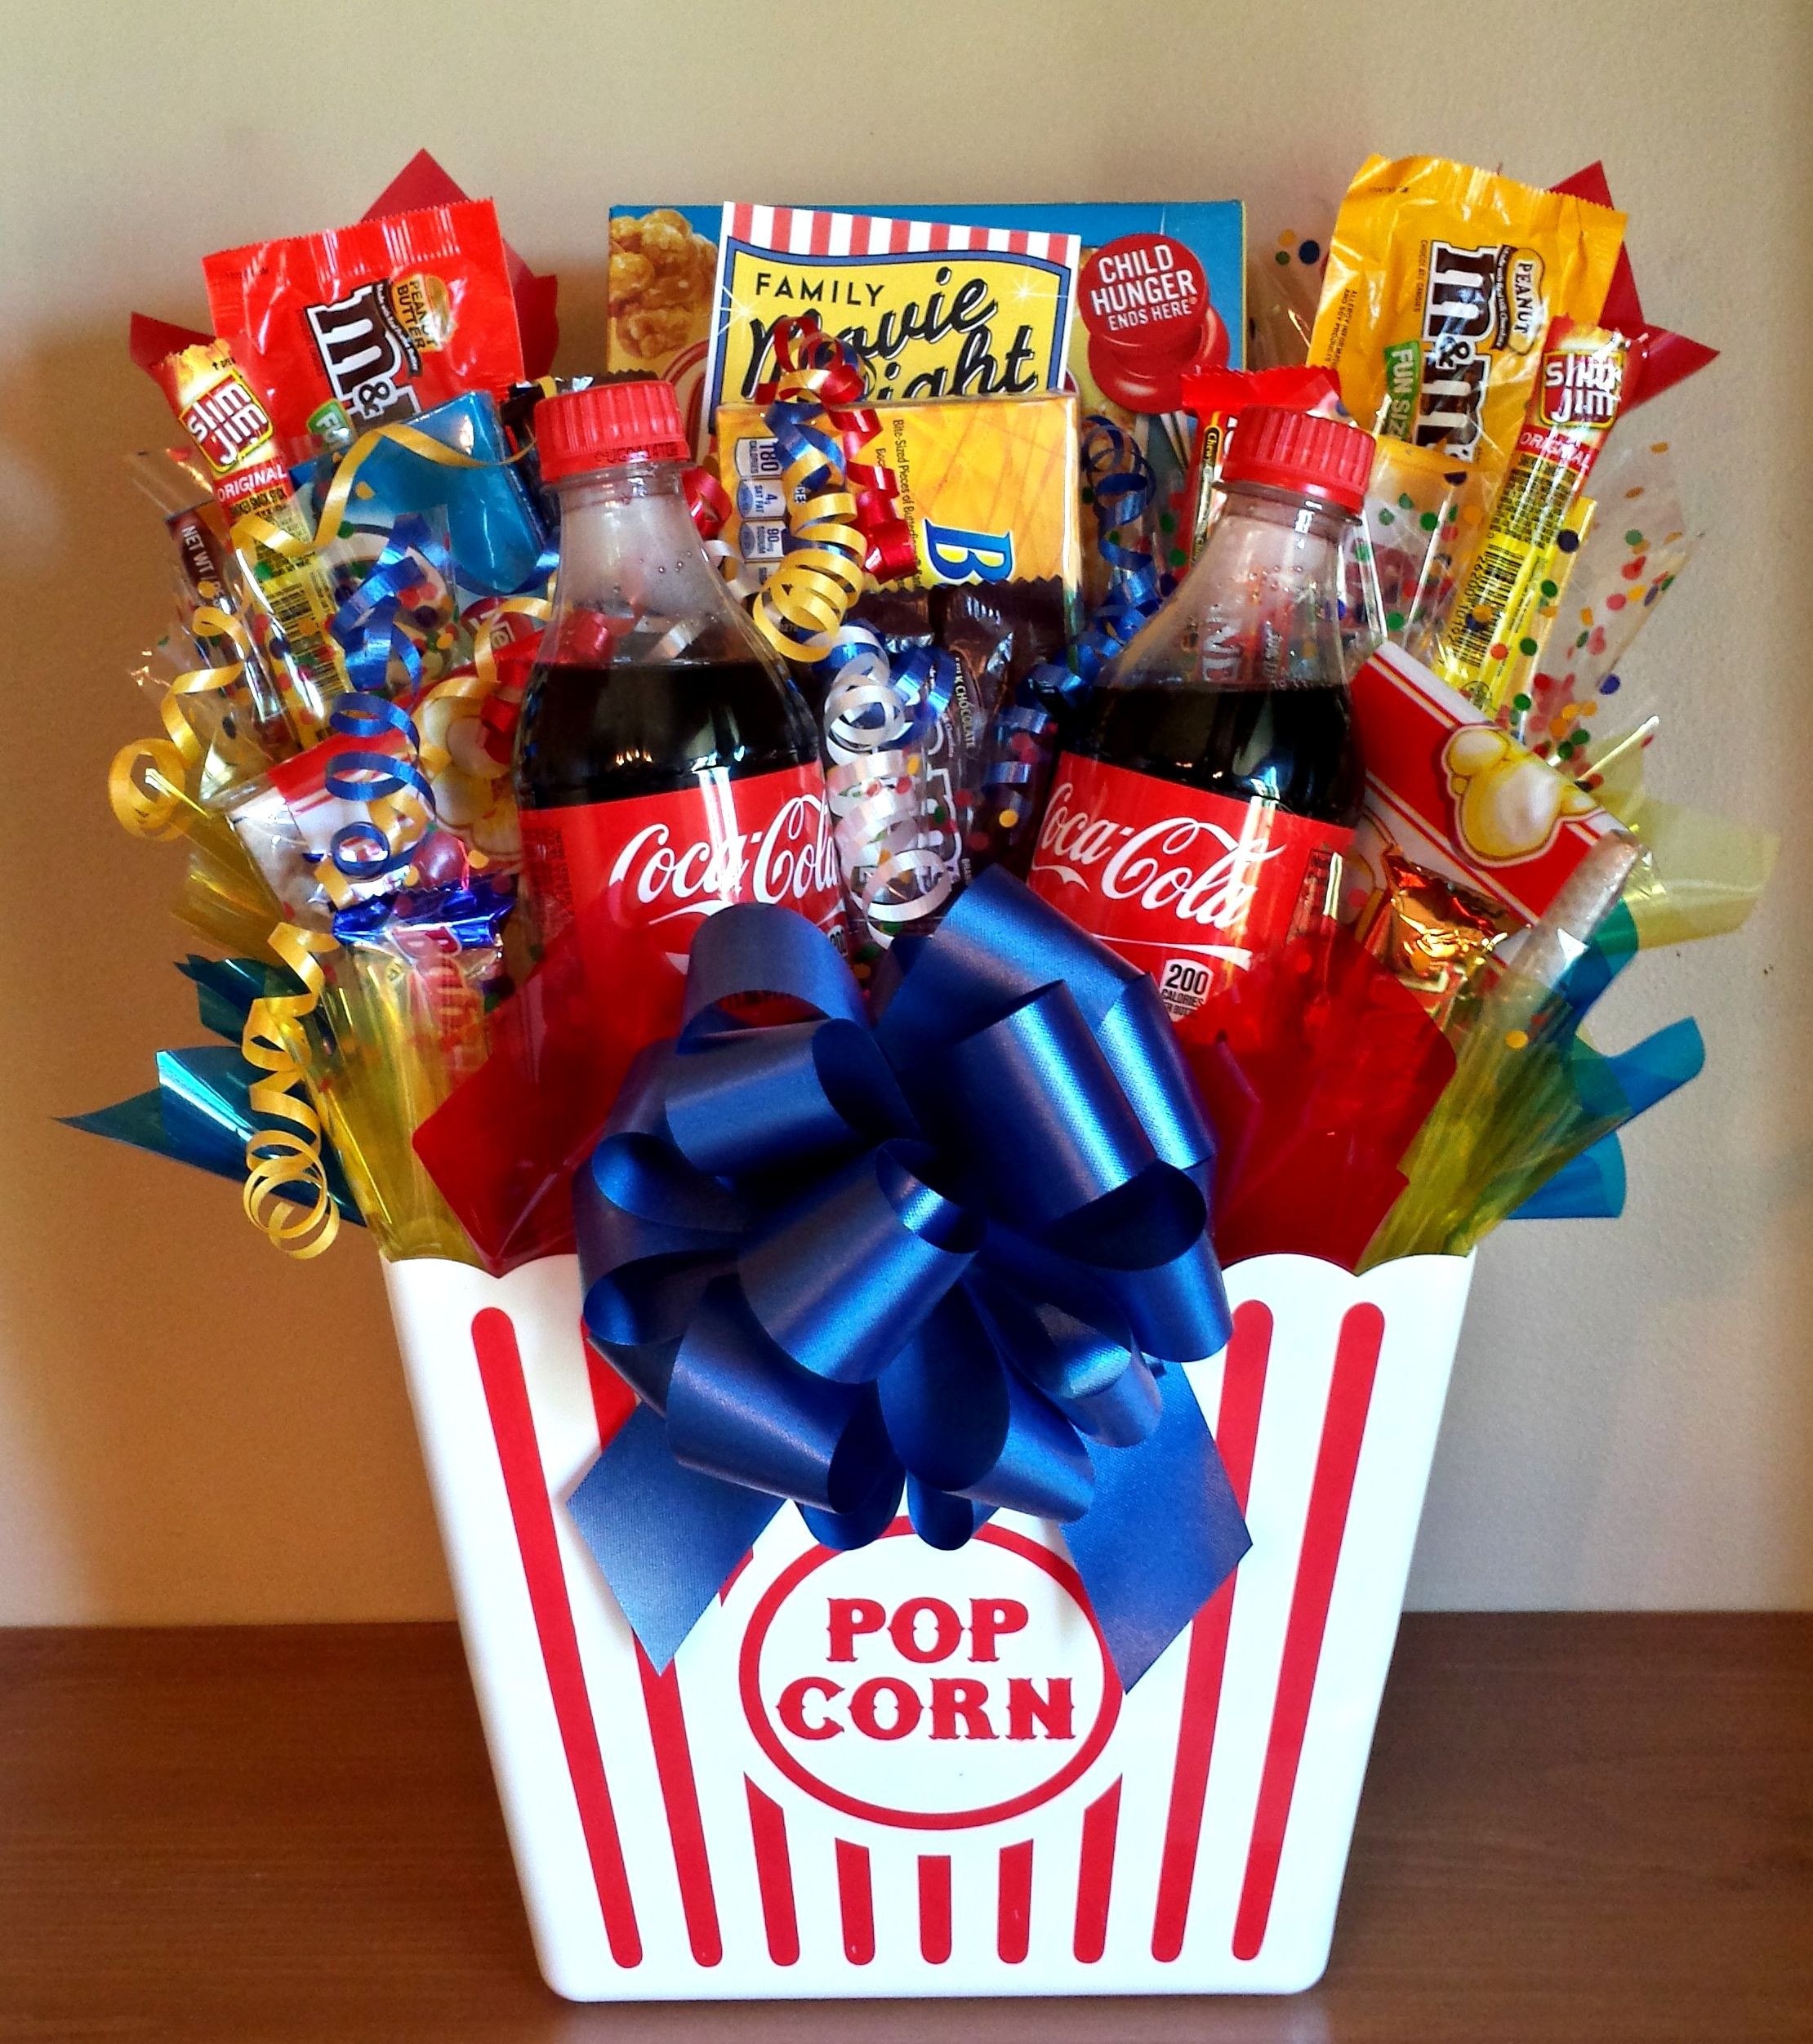 Top 22 Movie Ticket Gift Basket Ideas - Home, Family, Style and Art Ideas